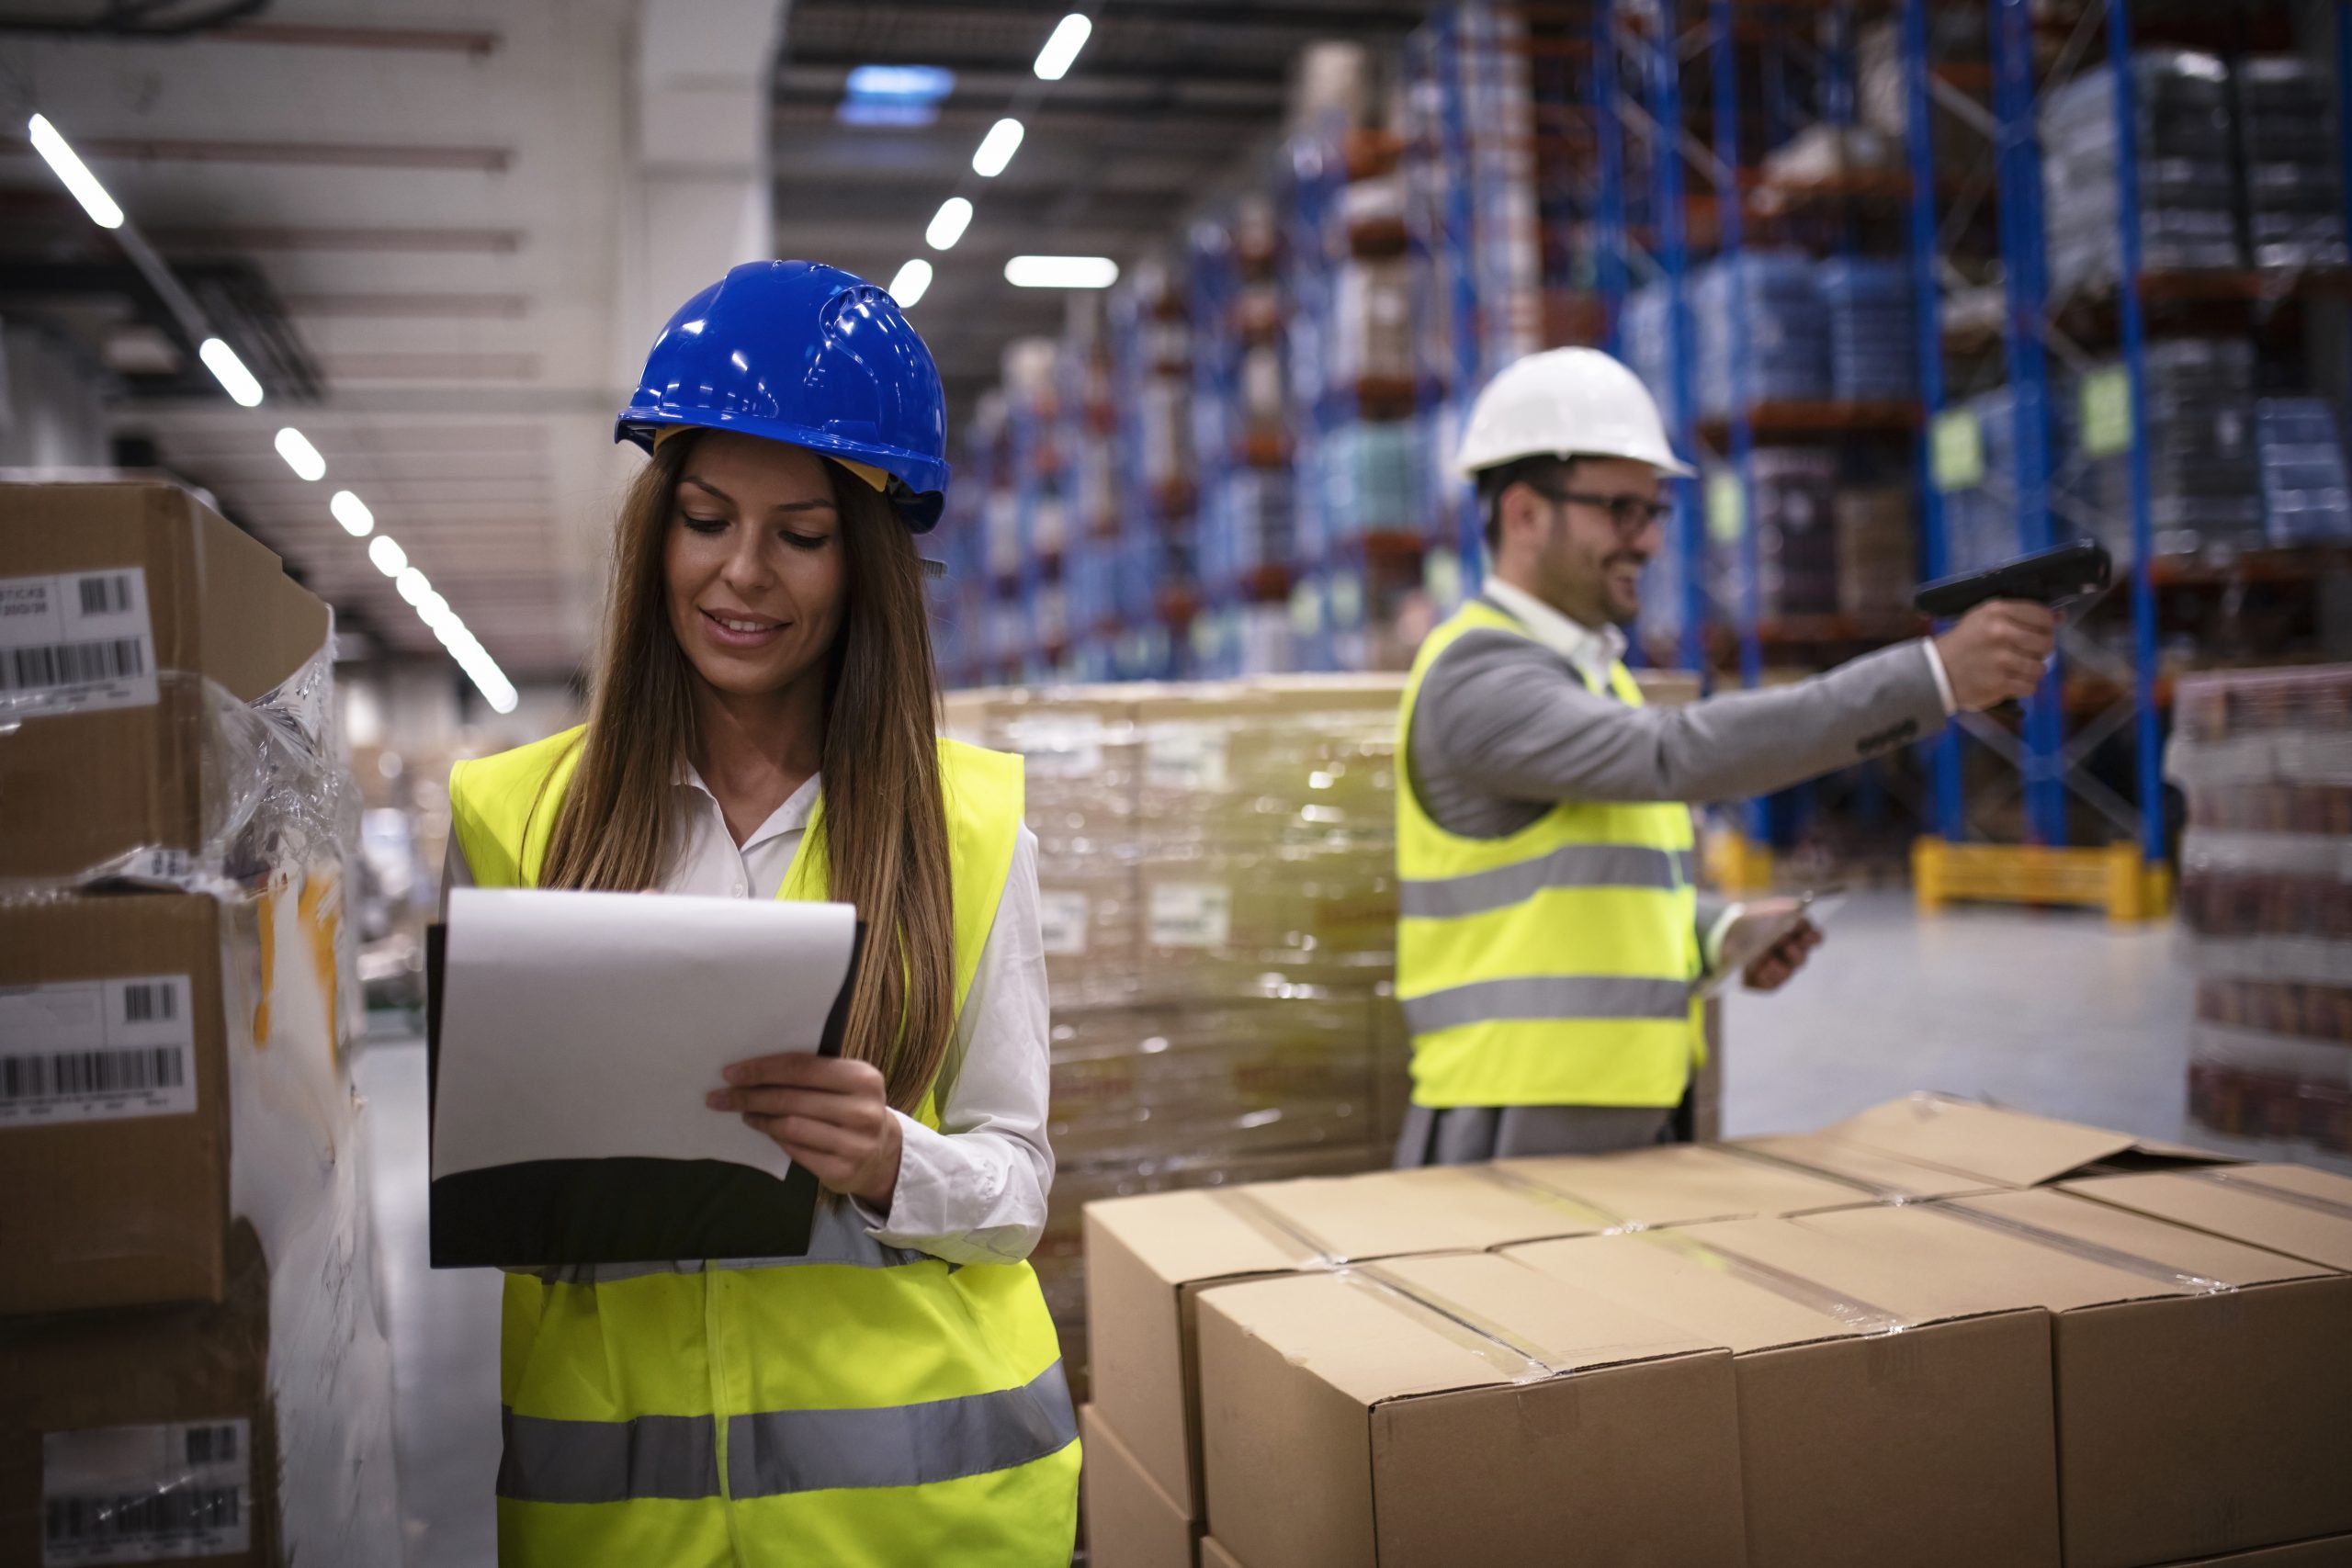 Female factory worker in reflective uniform with hardhat helmet checking new arrival of goods in warehouse while worker using bar code reader in background. Logistics and distribution.